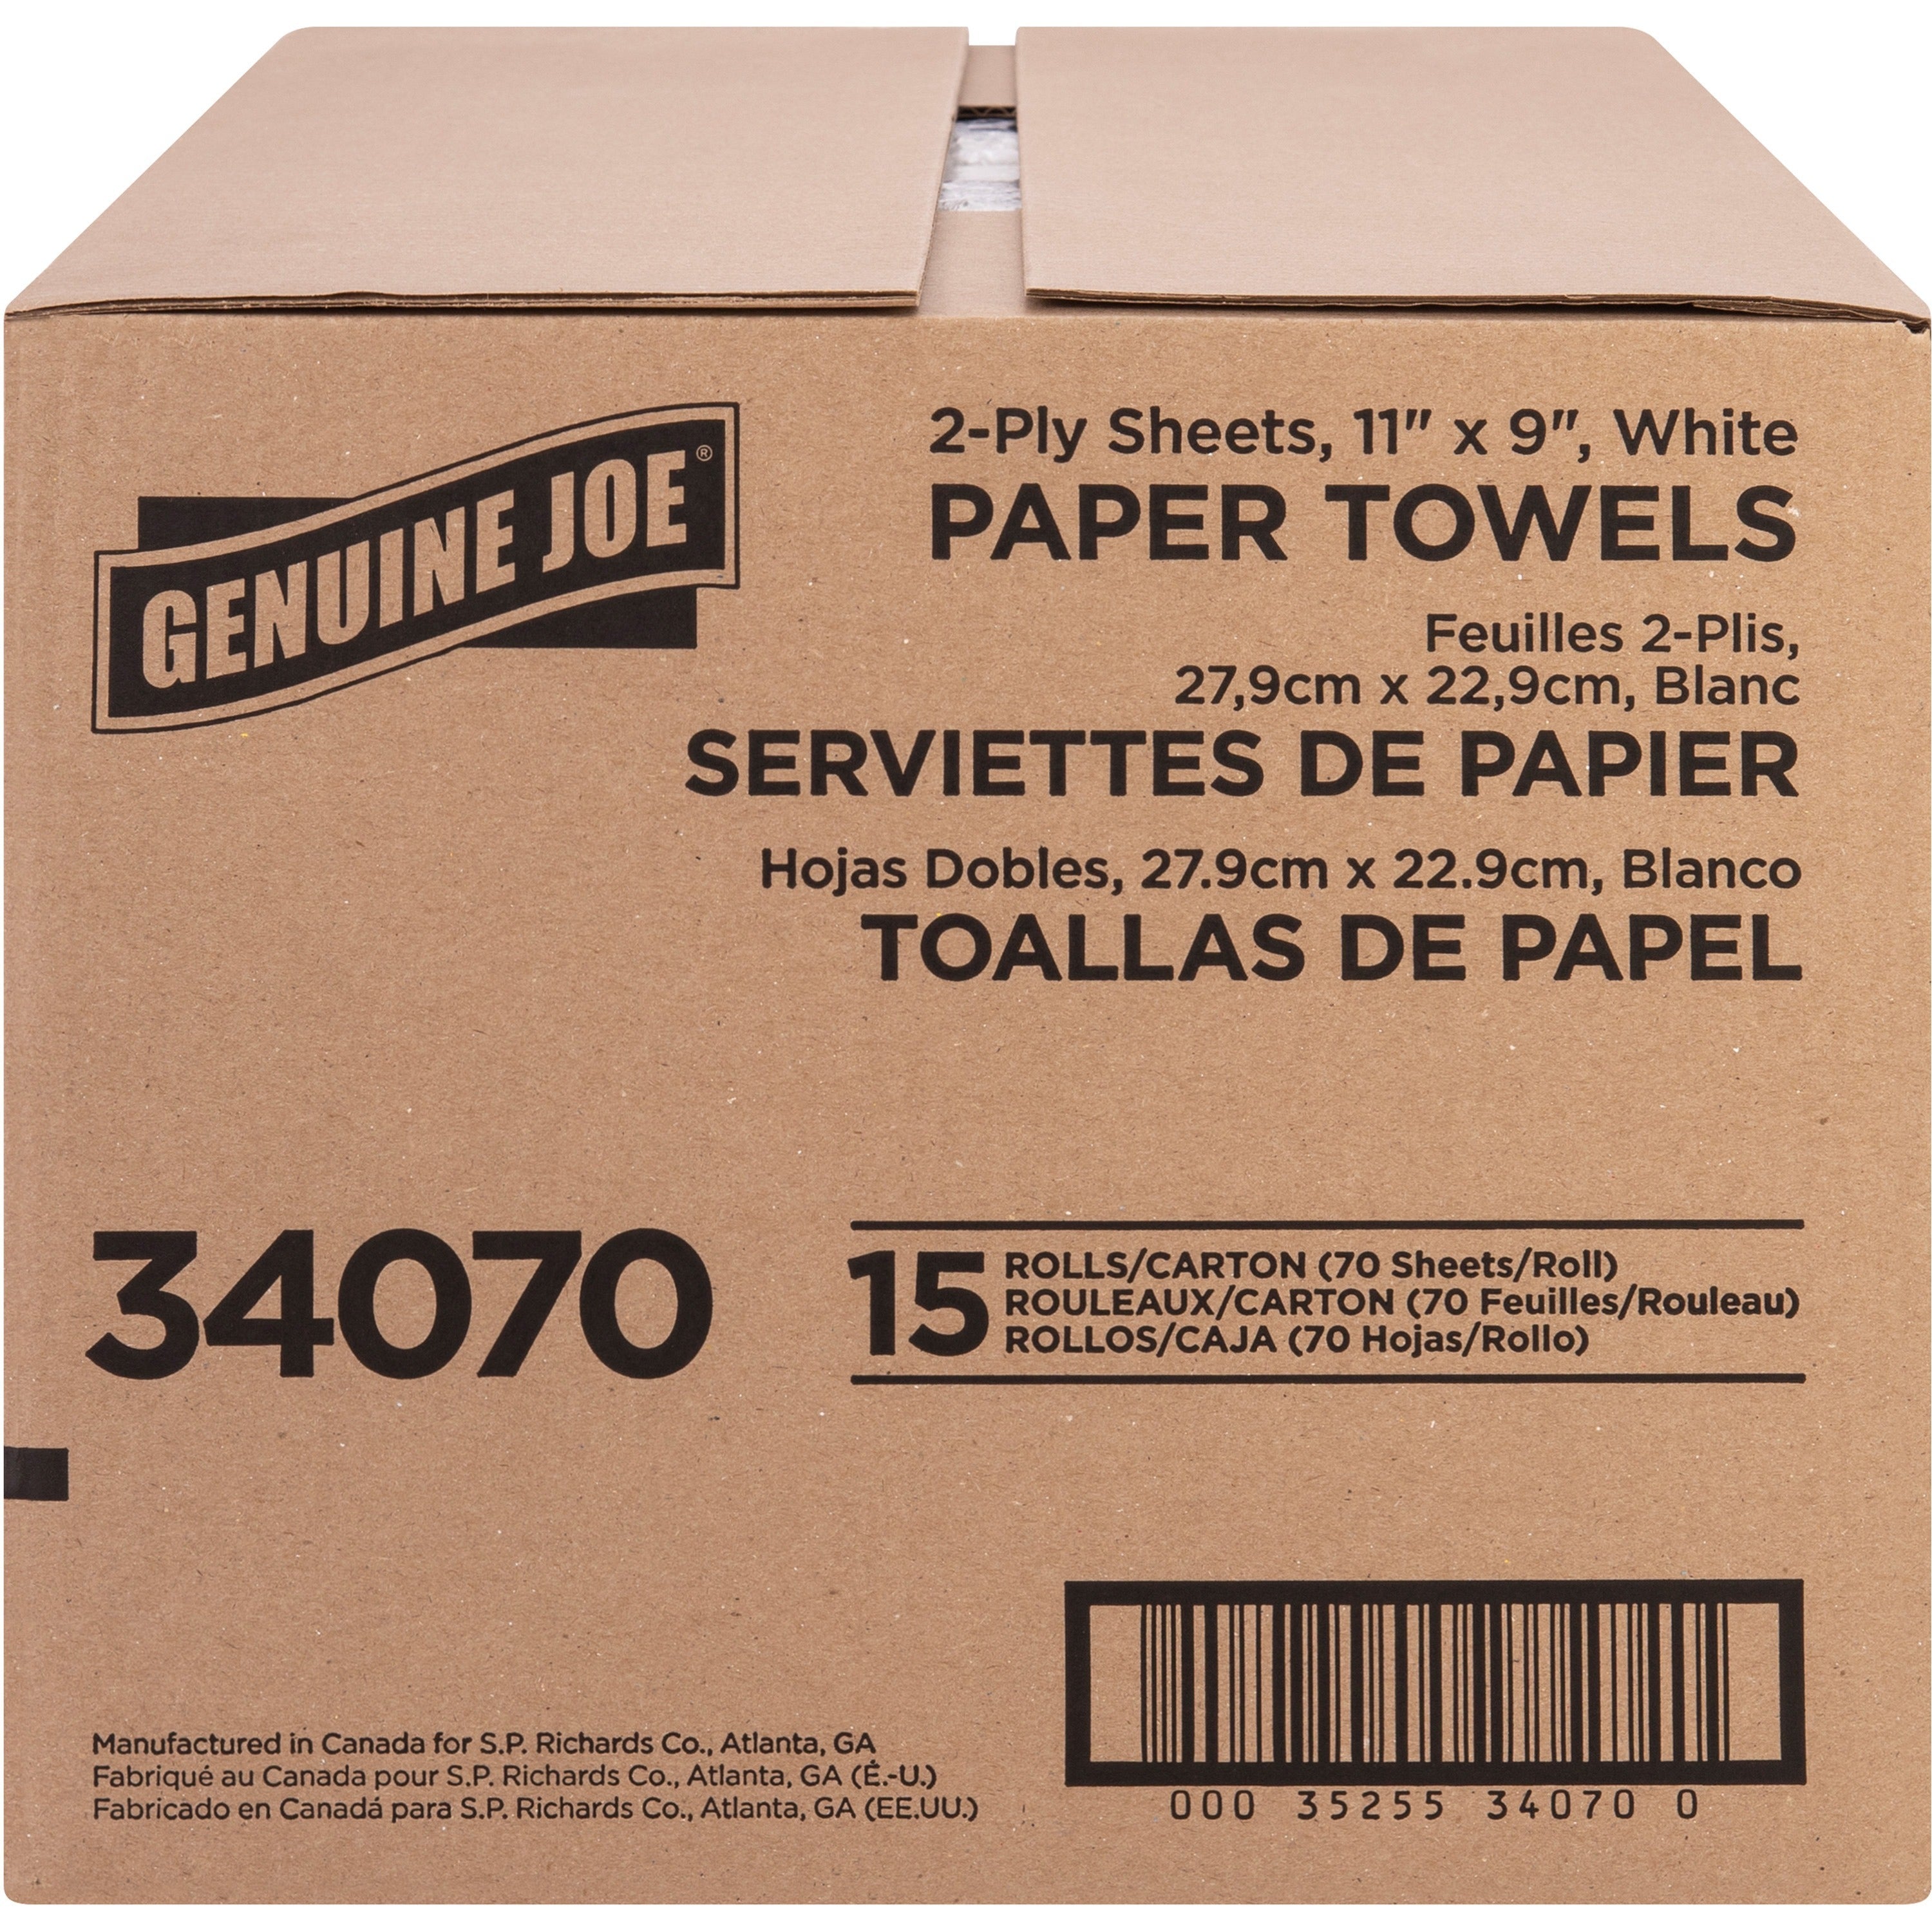 genuine-joe-2-ply-paper-towel-rolls-2-ply-9-x-11-70-sheets-roll-white-paper-absorbent-soft-perforated-tear-resistant-for-hand-food-service-kitchen-breakroom-15-carton_gjo34070 - 2